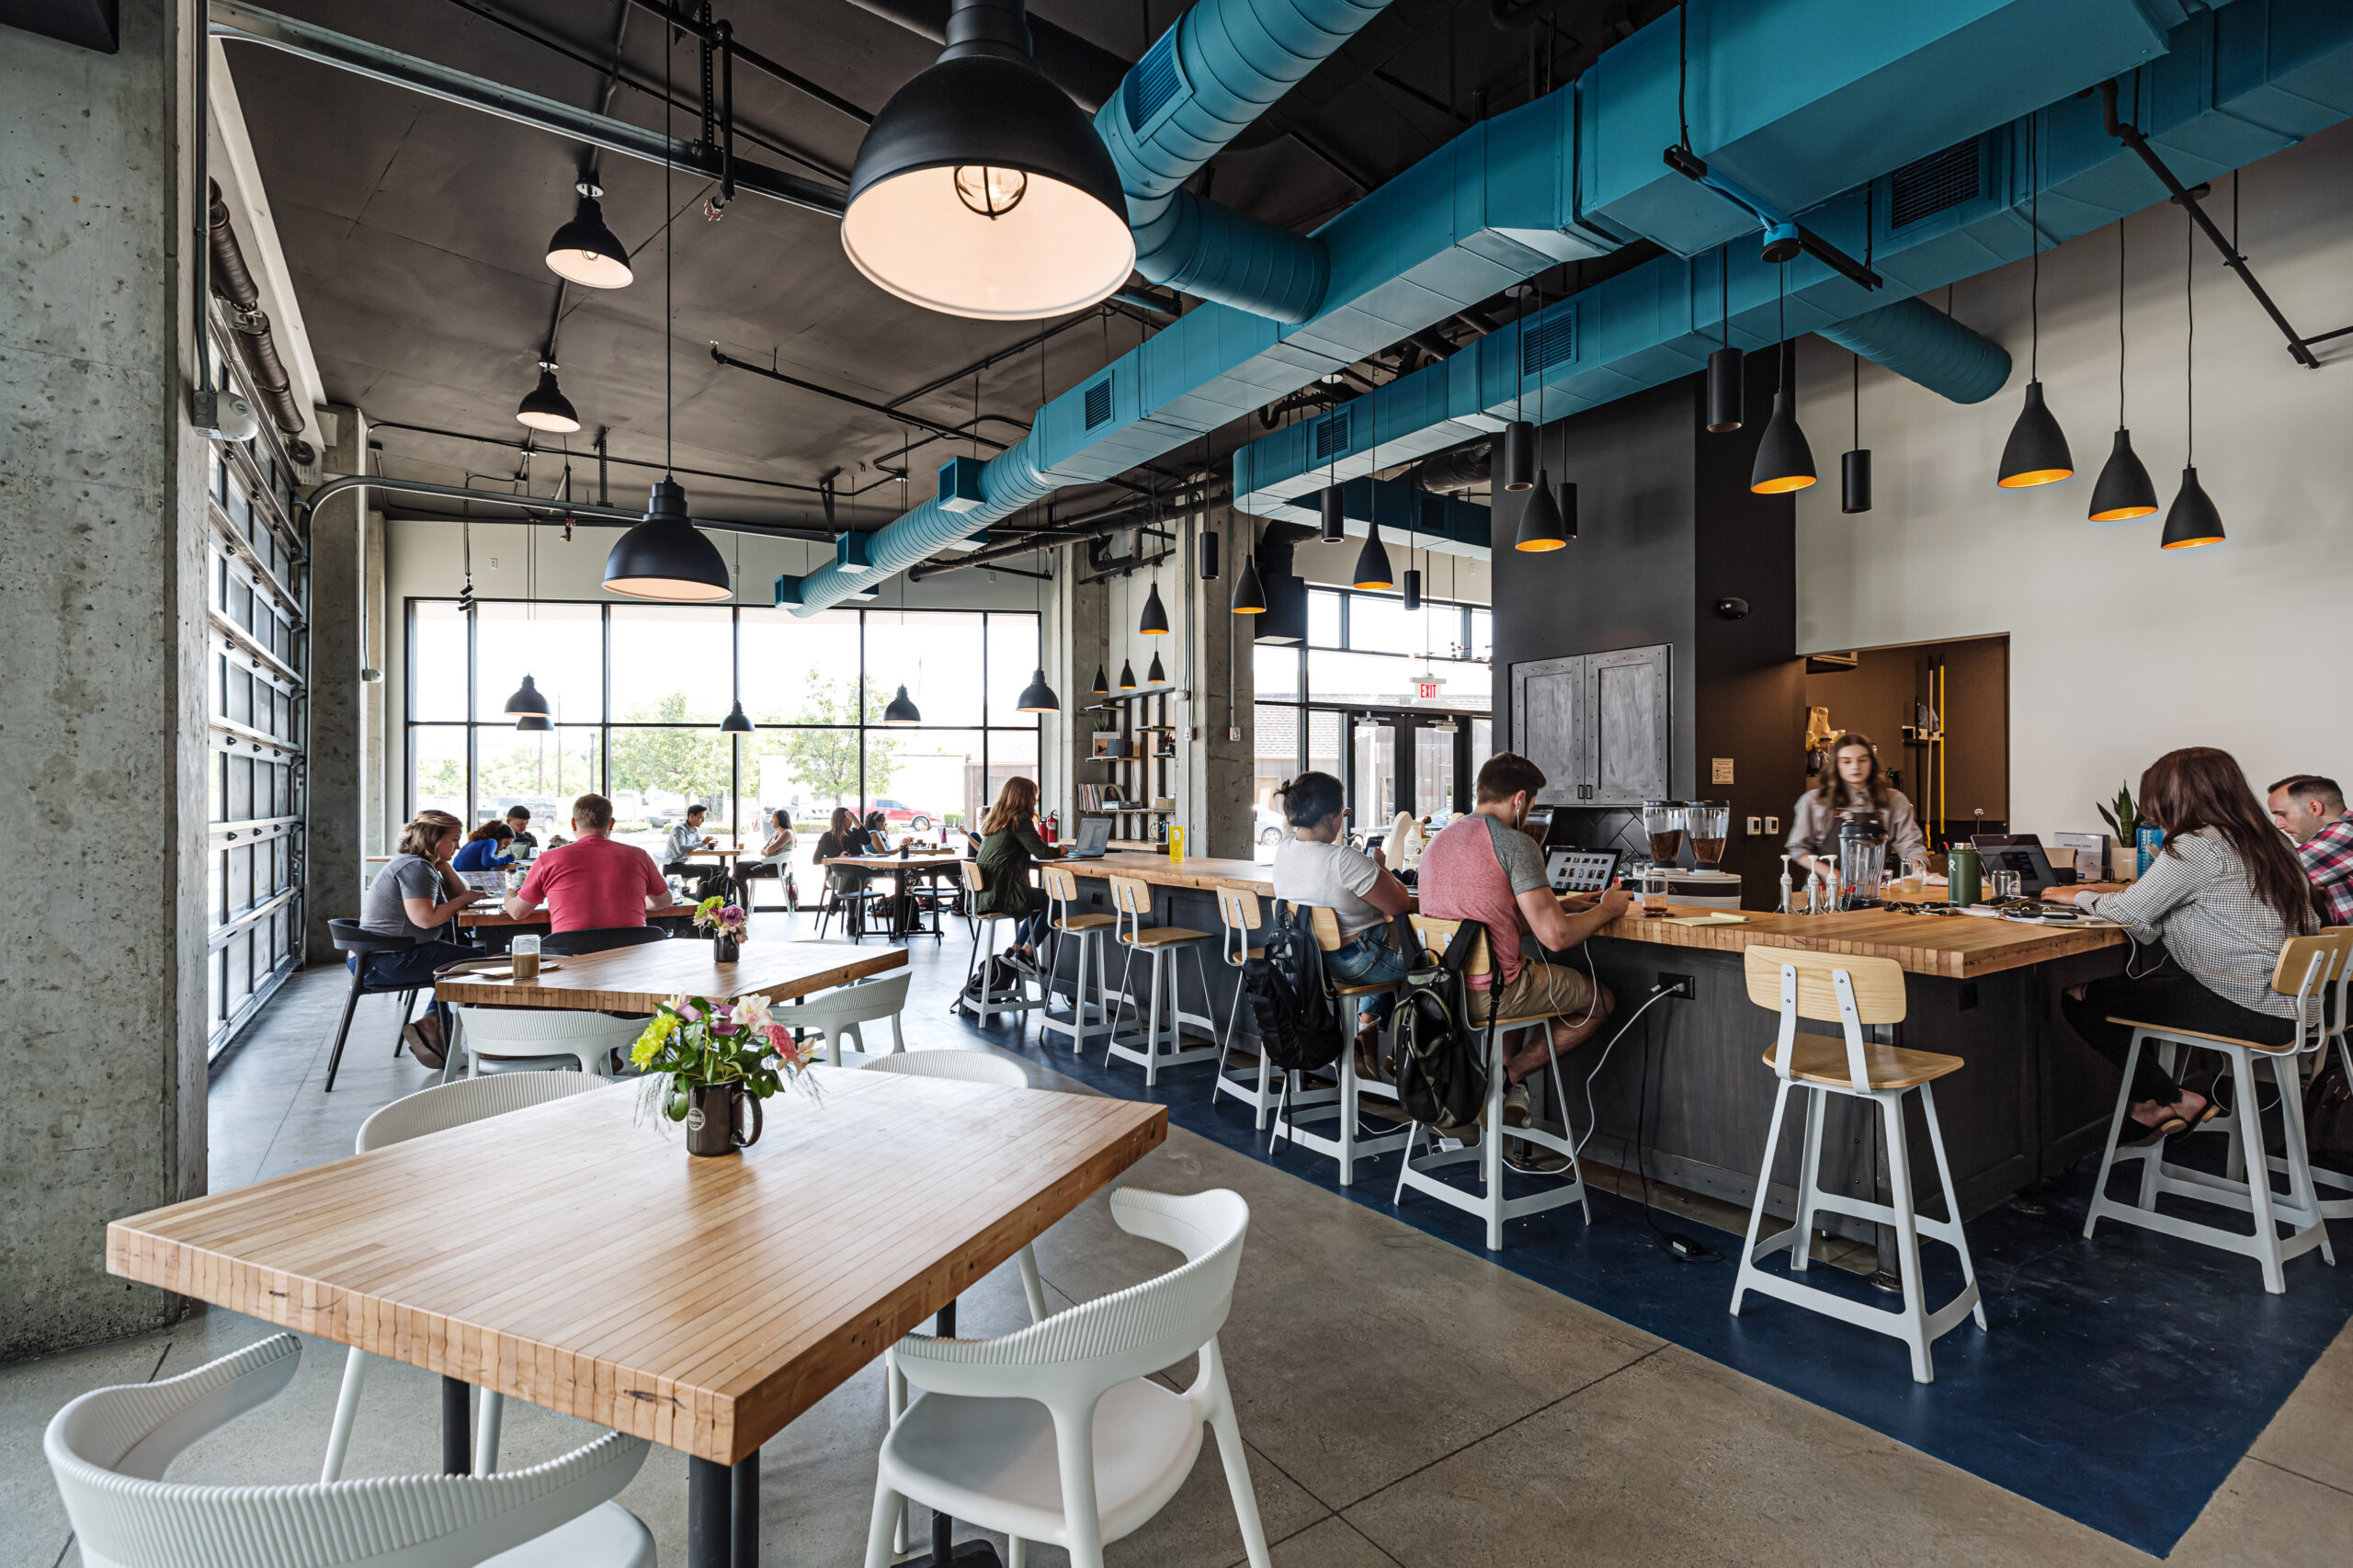 From Coffeehouses to Colleges: Triad Design Team Gives Insight on Favorite Projects